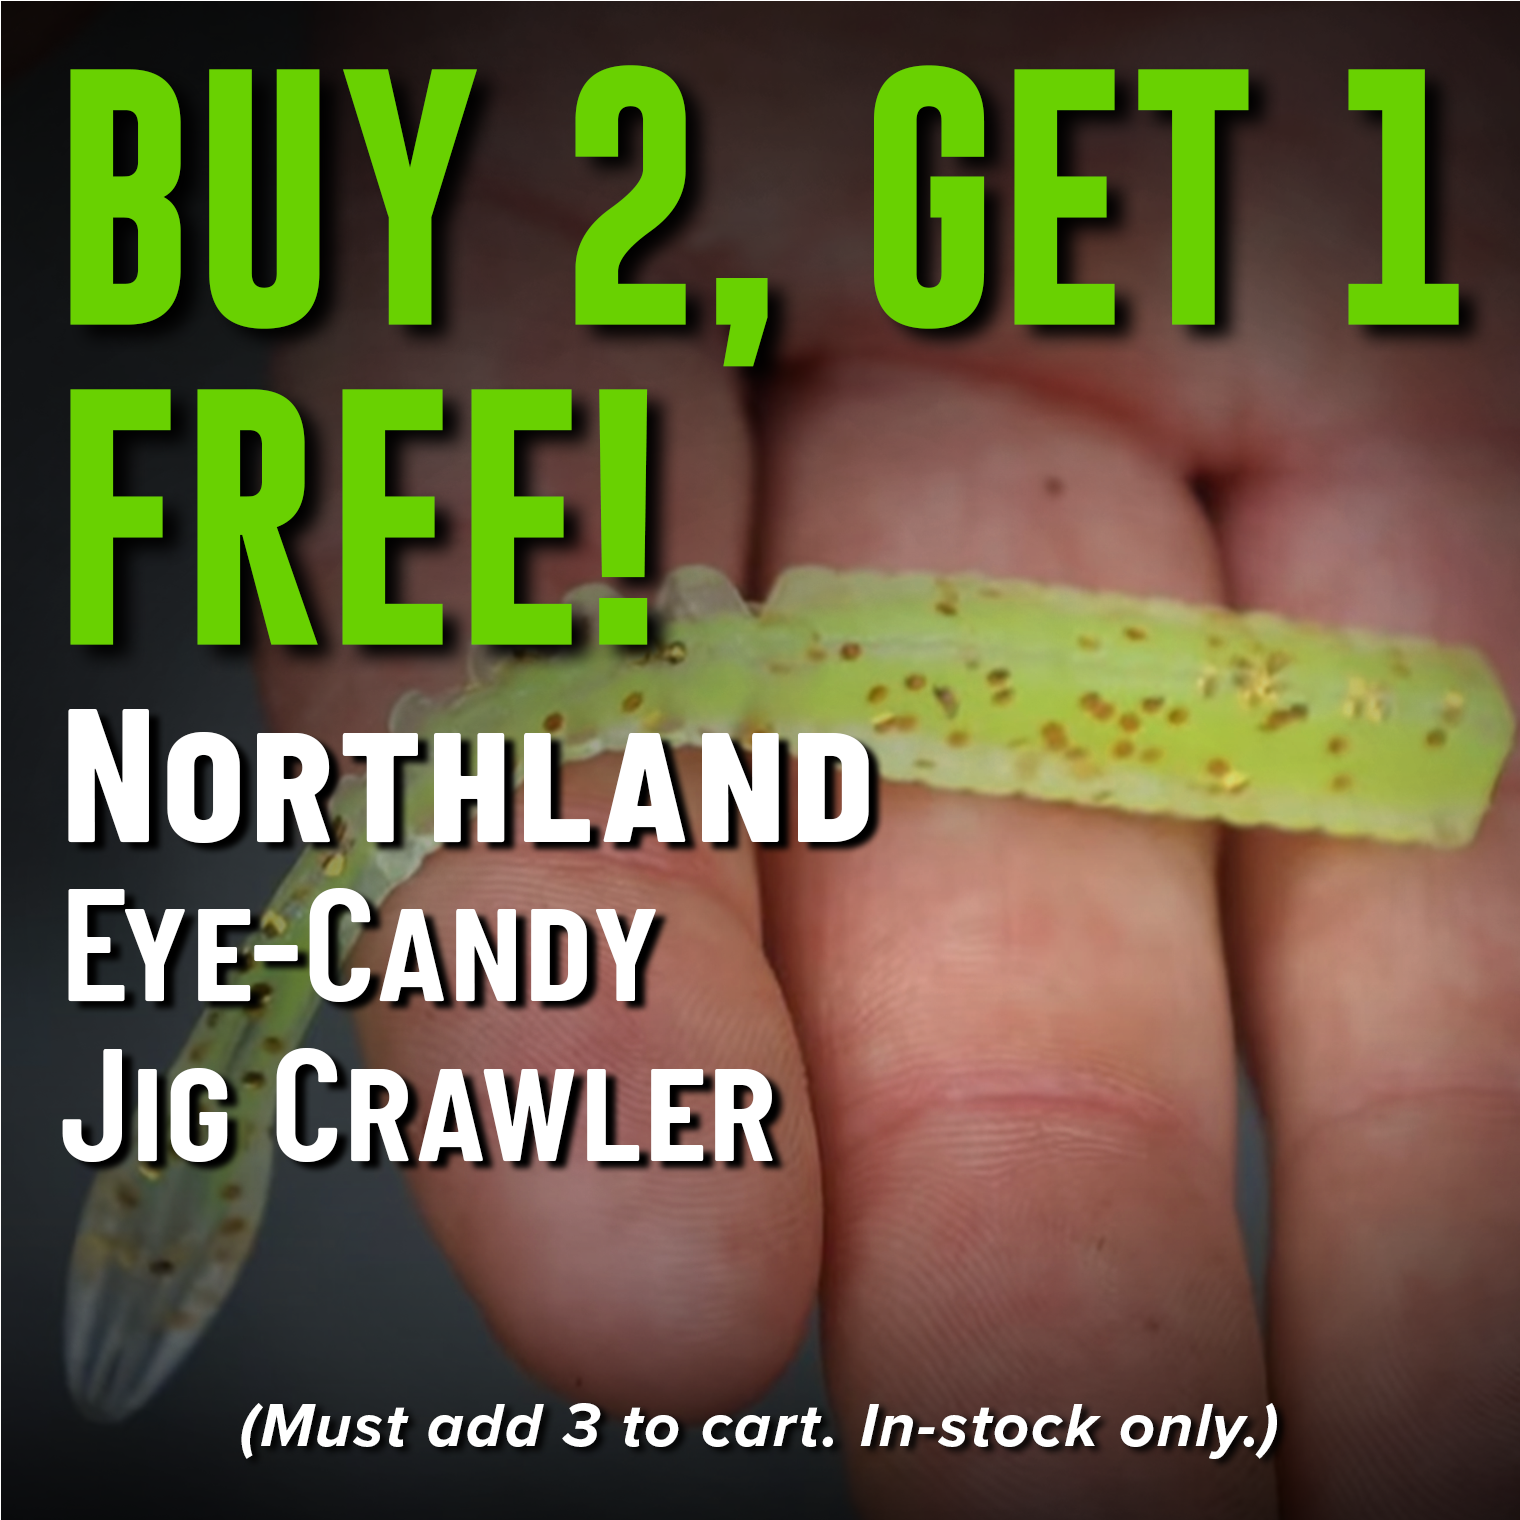 Buy 2, Get 1 Free! Norhtland Eye-Candy Jig Crawler (Must add 3 to cart. In-stock only.)